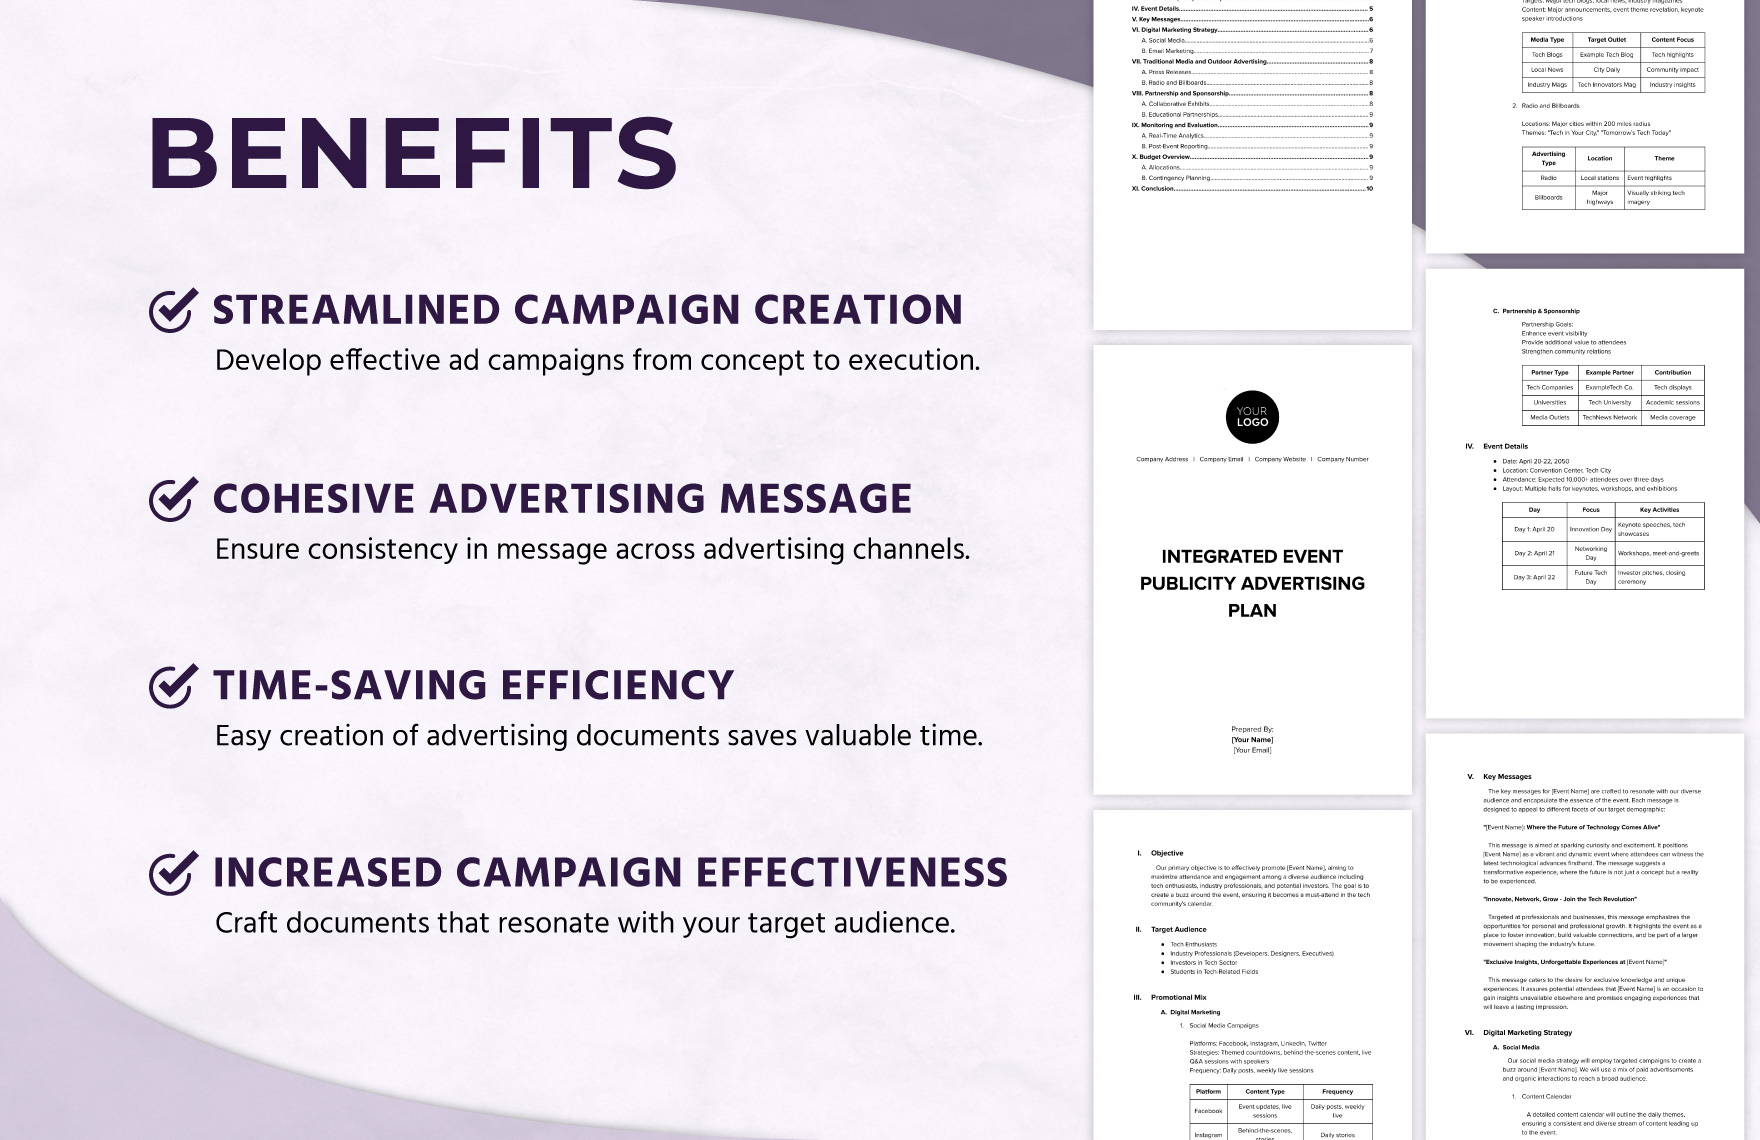 Integrated Event Publicity Advertising Plan Template